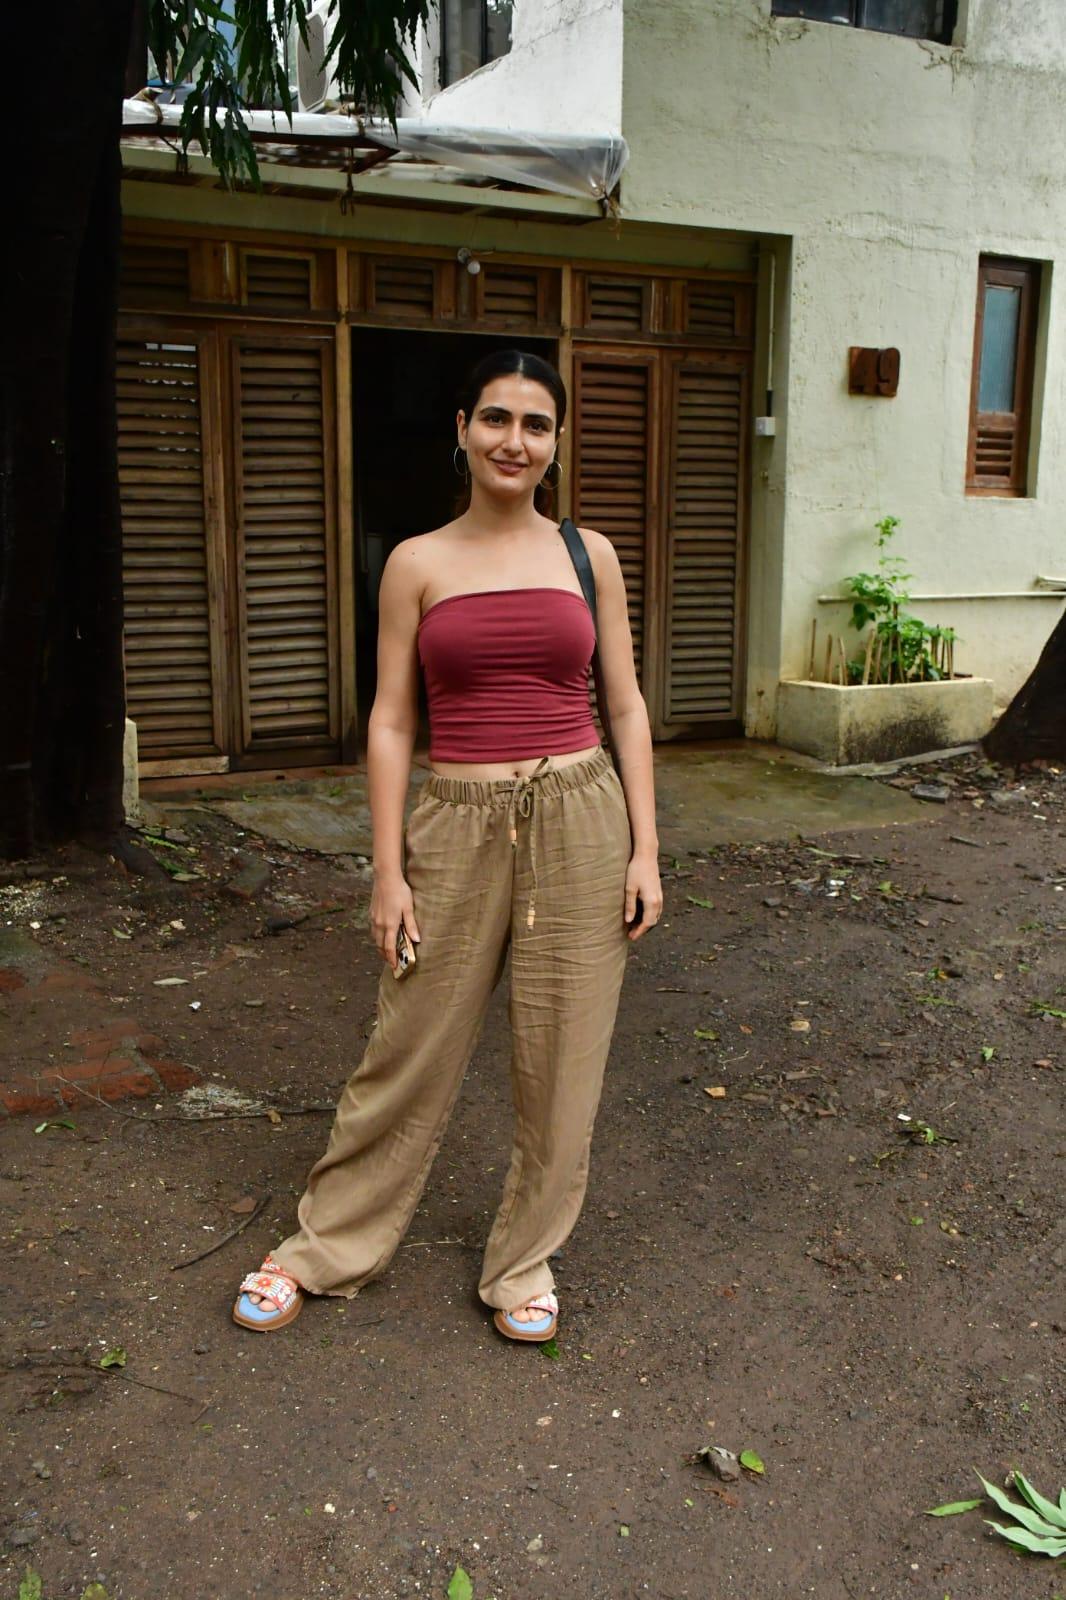 Fatima Sana Shaikh effortlessly combined comfort and style as she strolled around town in relaxed trousers and a maroon tube top.